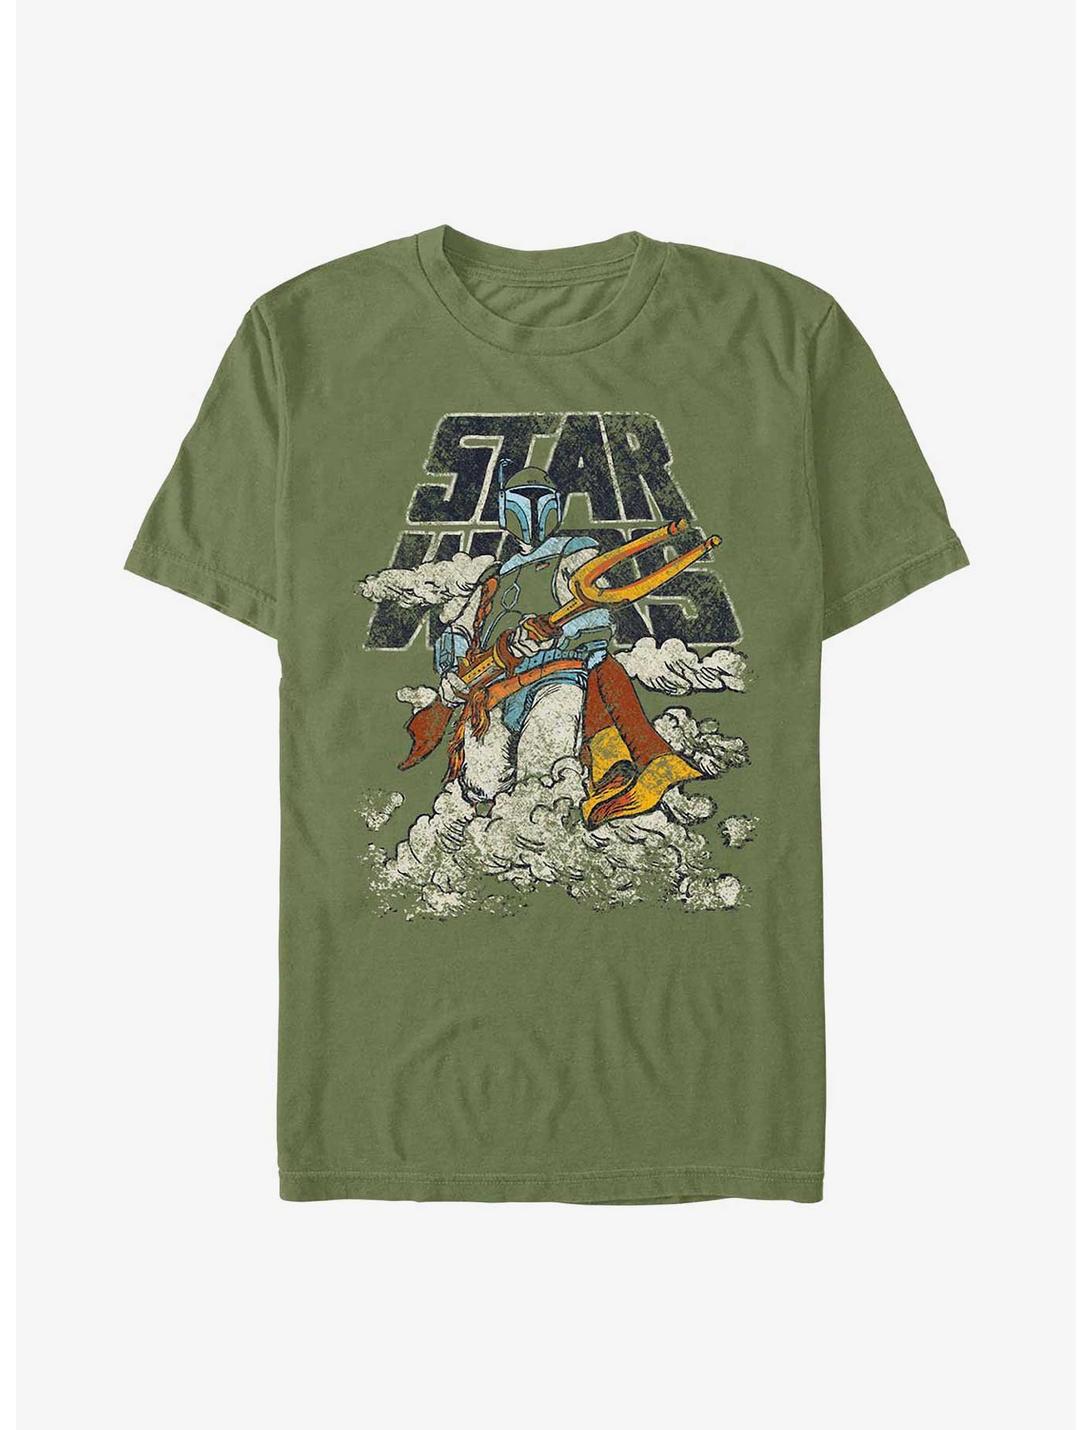 Star Wars Cloudy With A Chance Of Boba Fett T-Shirt, MIL GRN, hi-res